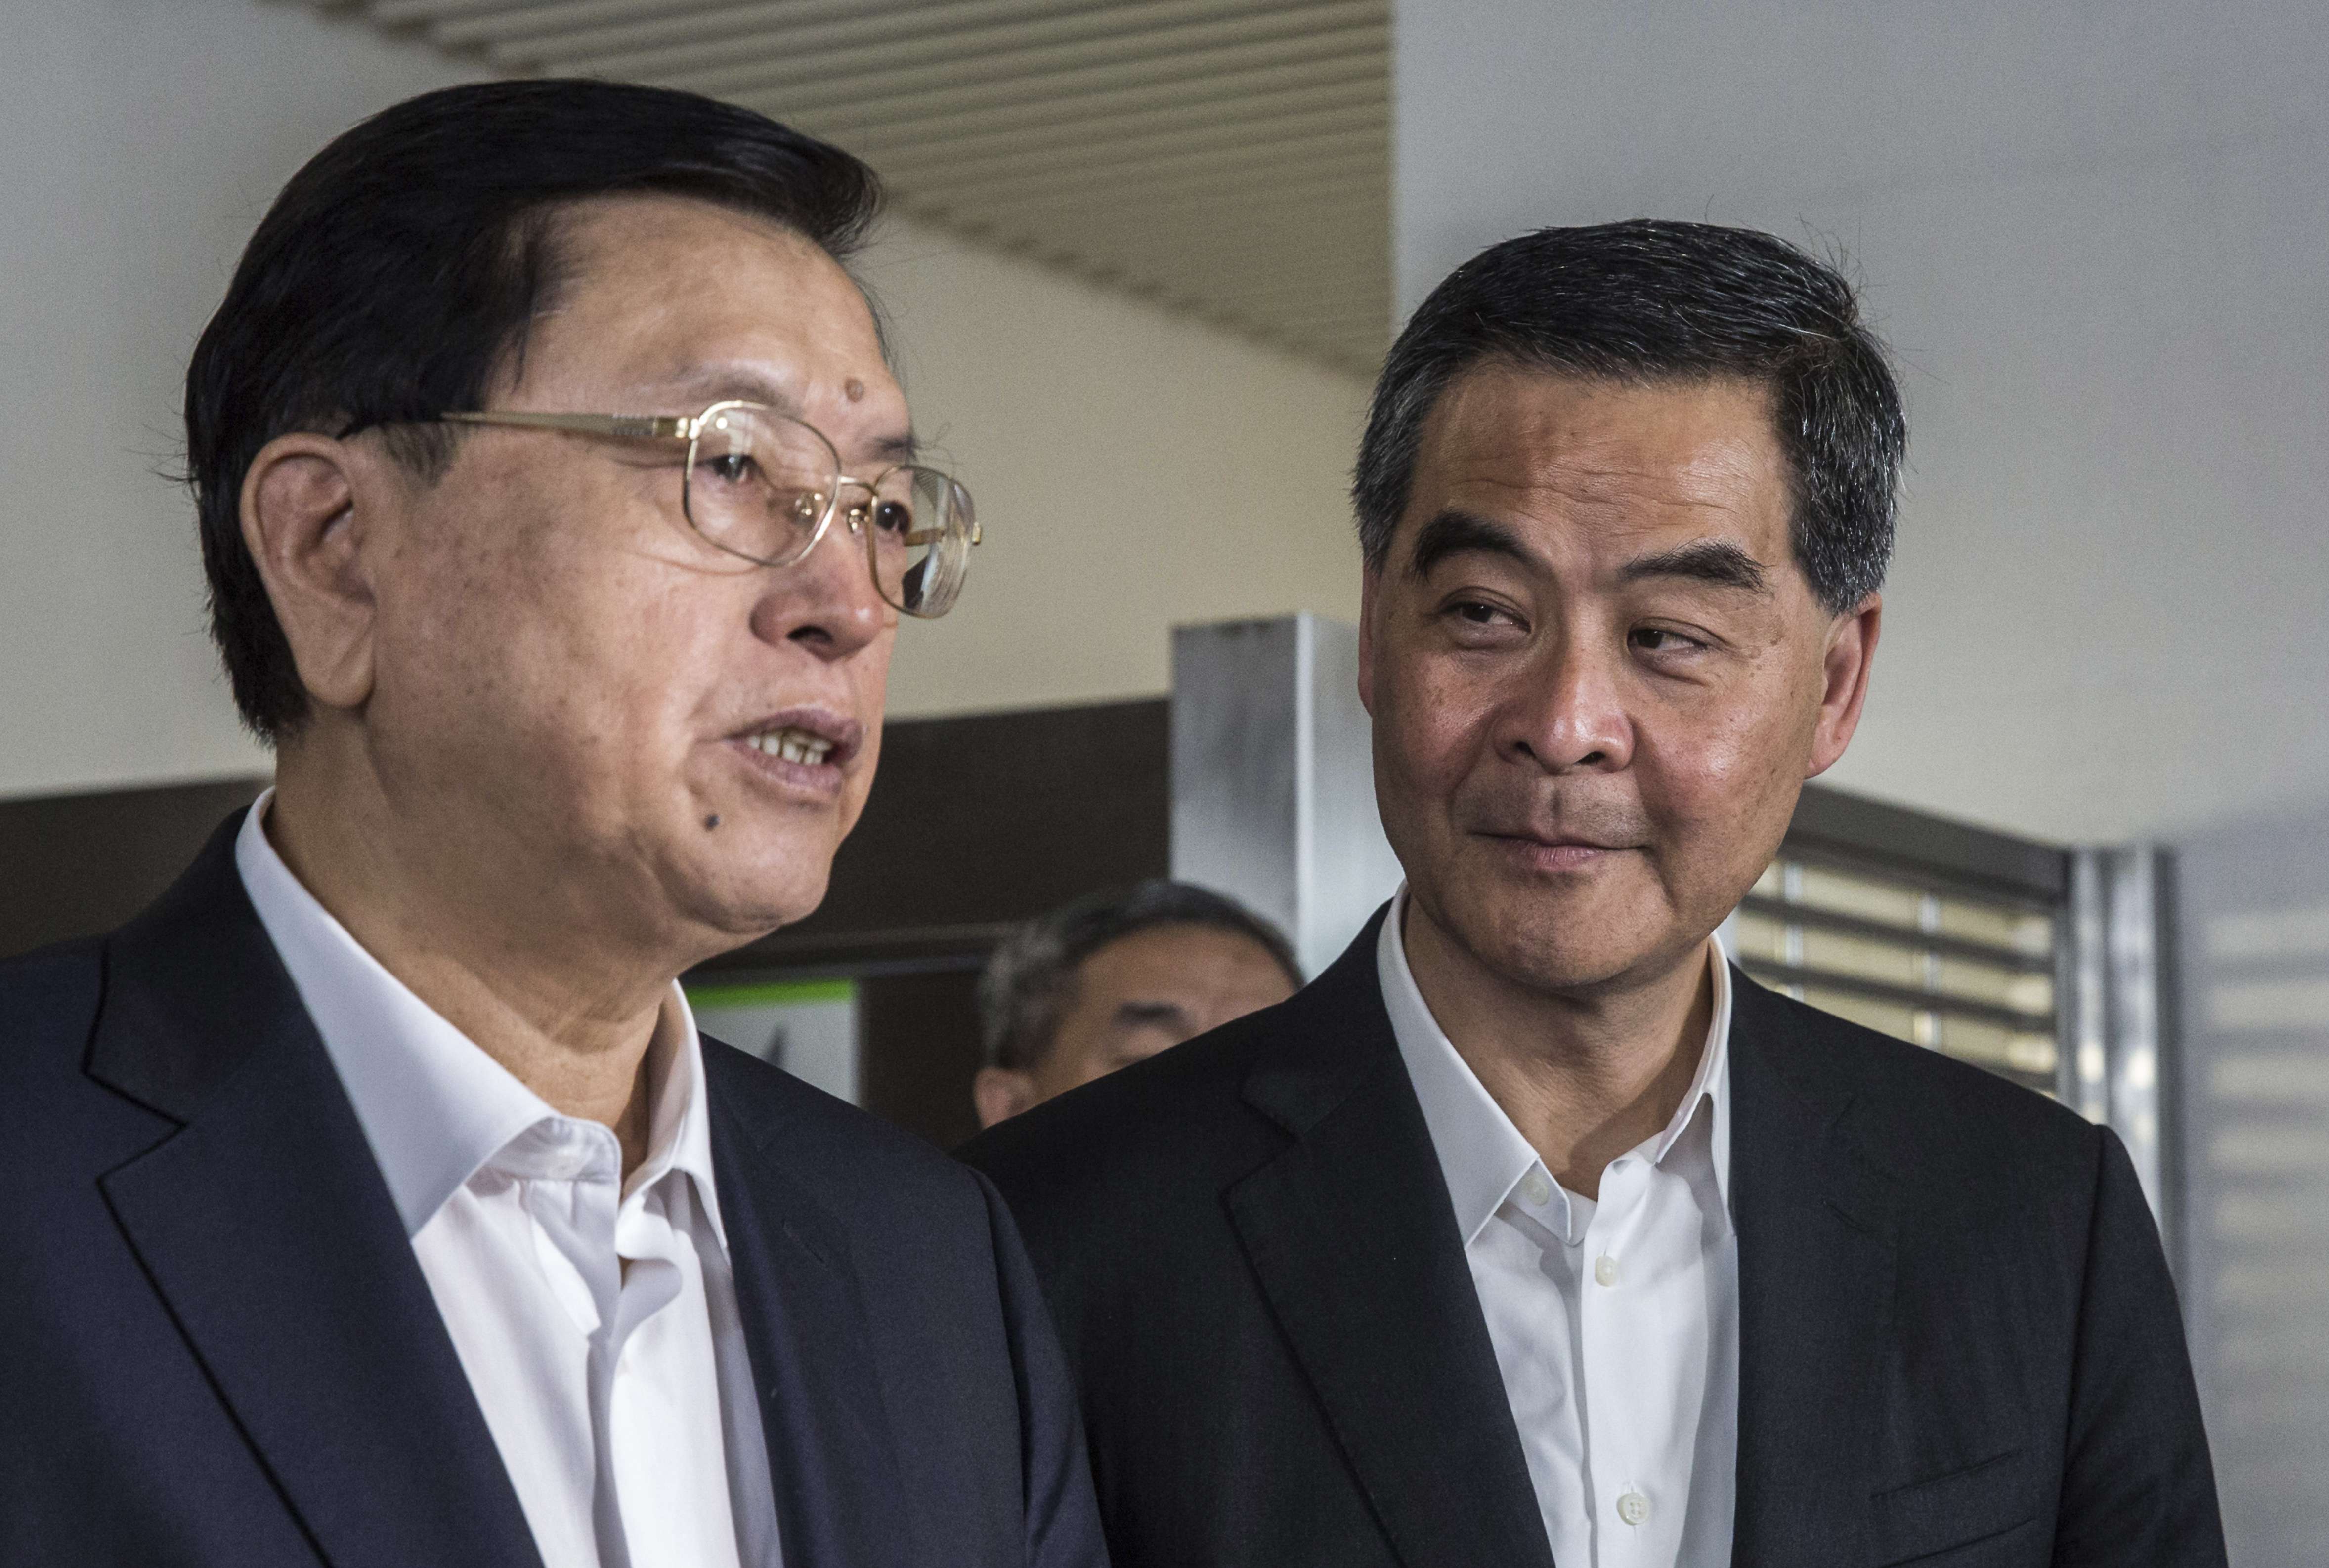 Hong Kong Chief Executive Leung Chun-ying, right, listens as Zhang Dejiang, chairman of China's National People's Congress speaks as they visit the foyer of a newly built public housing block due to open later this year in Hong Kong. Photo: SCMP Pictures